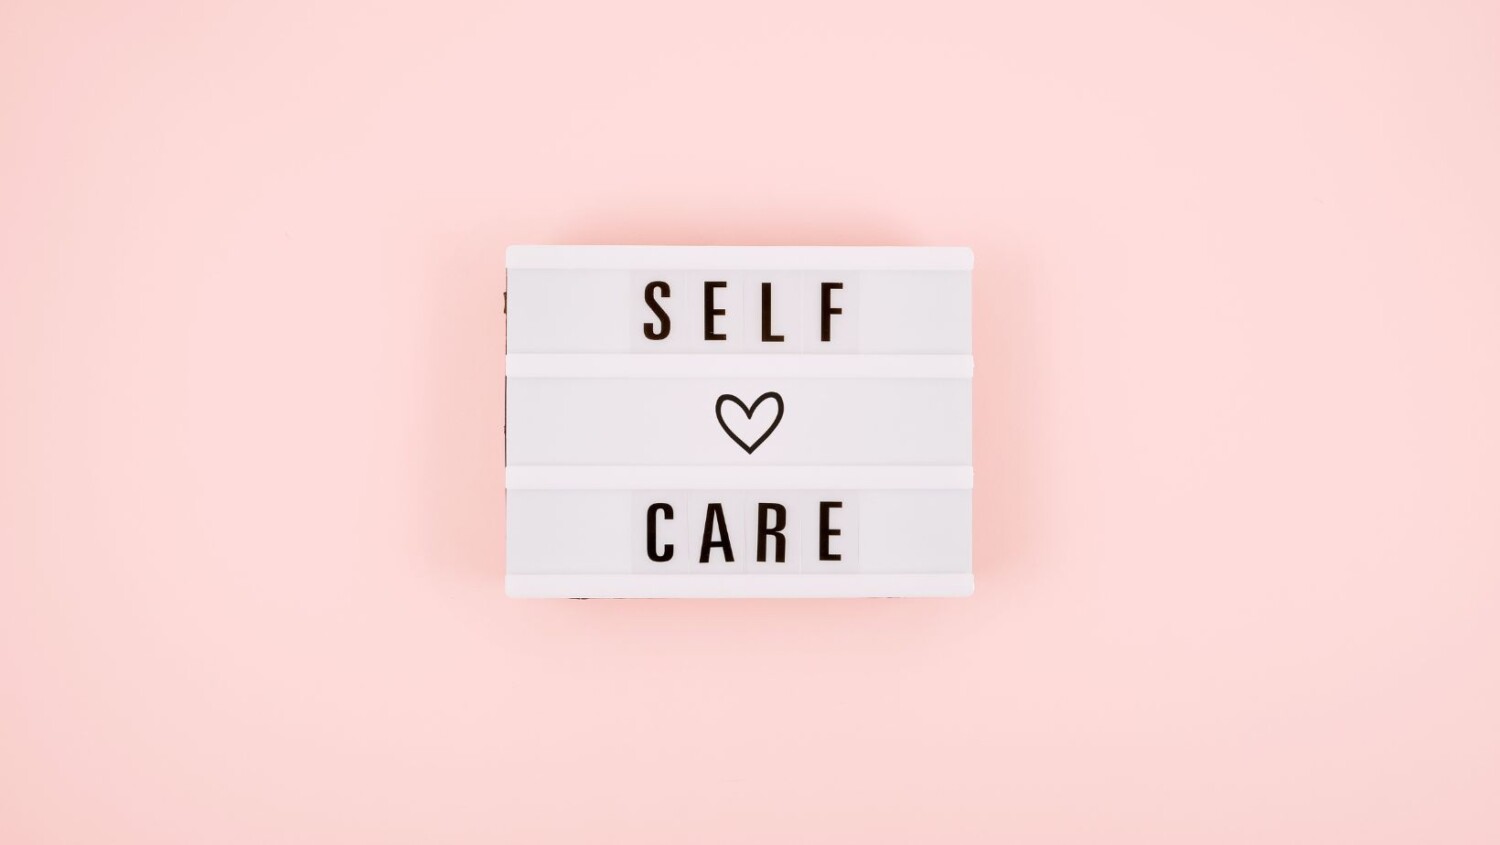 Self-care is healthcare.